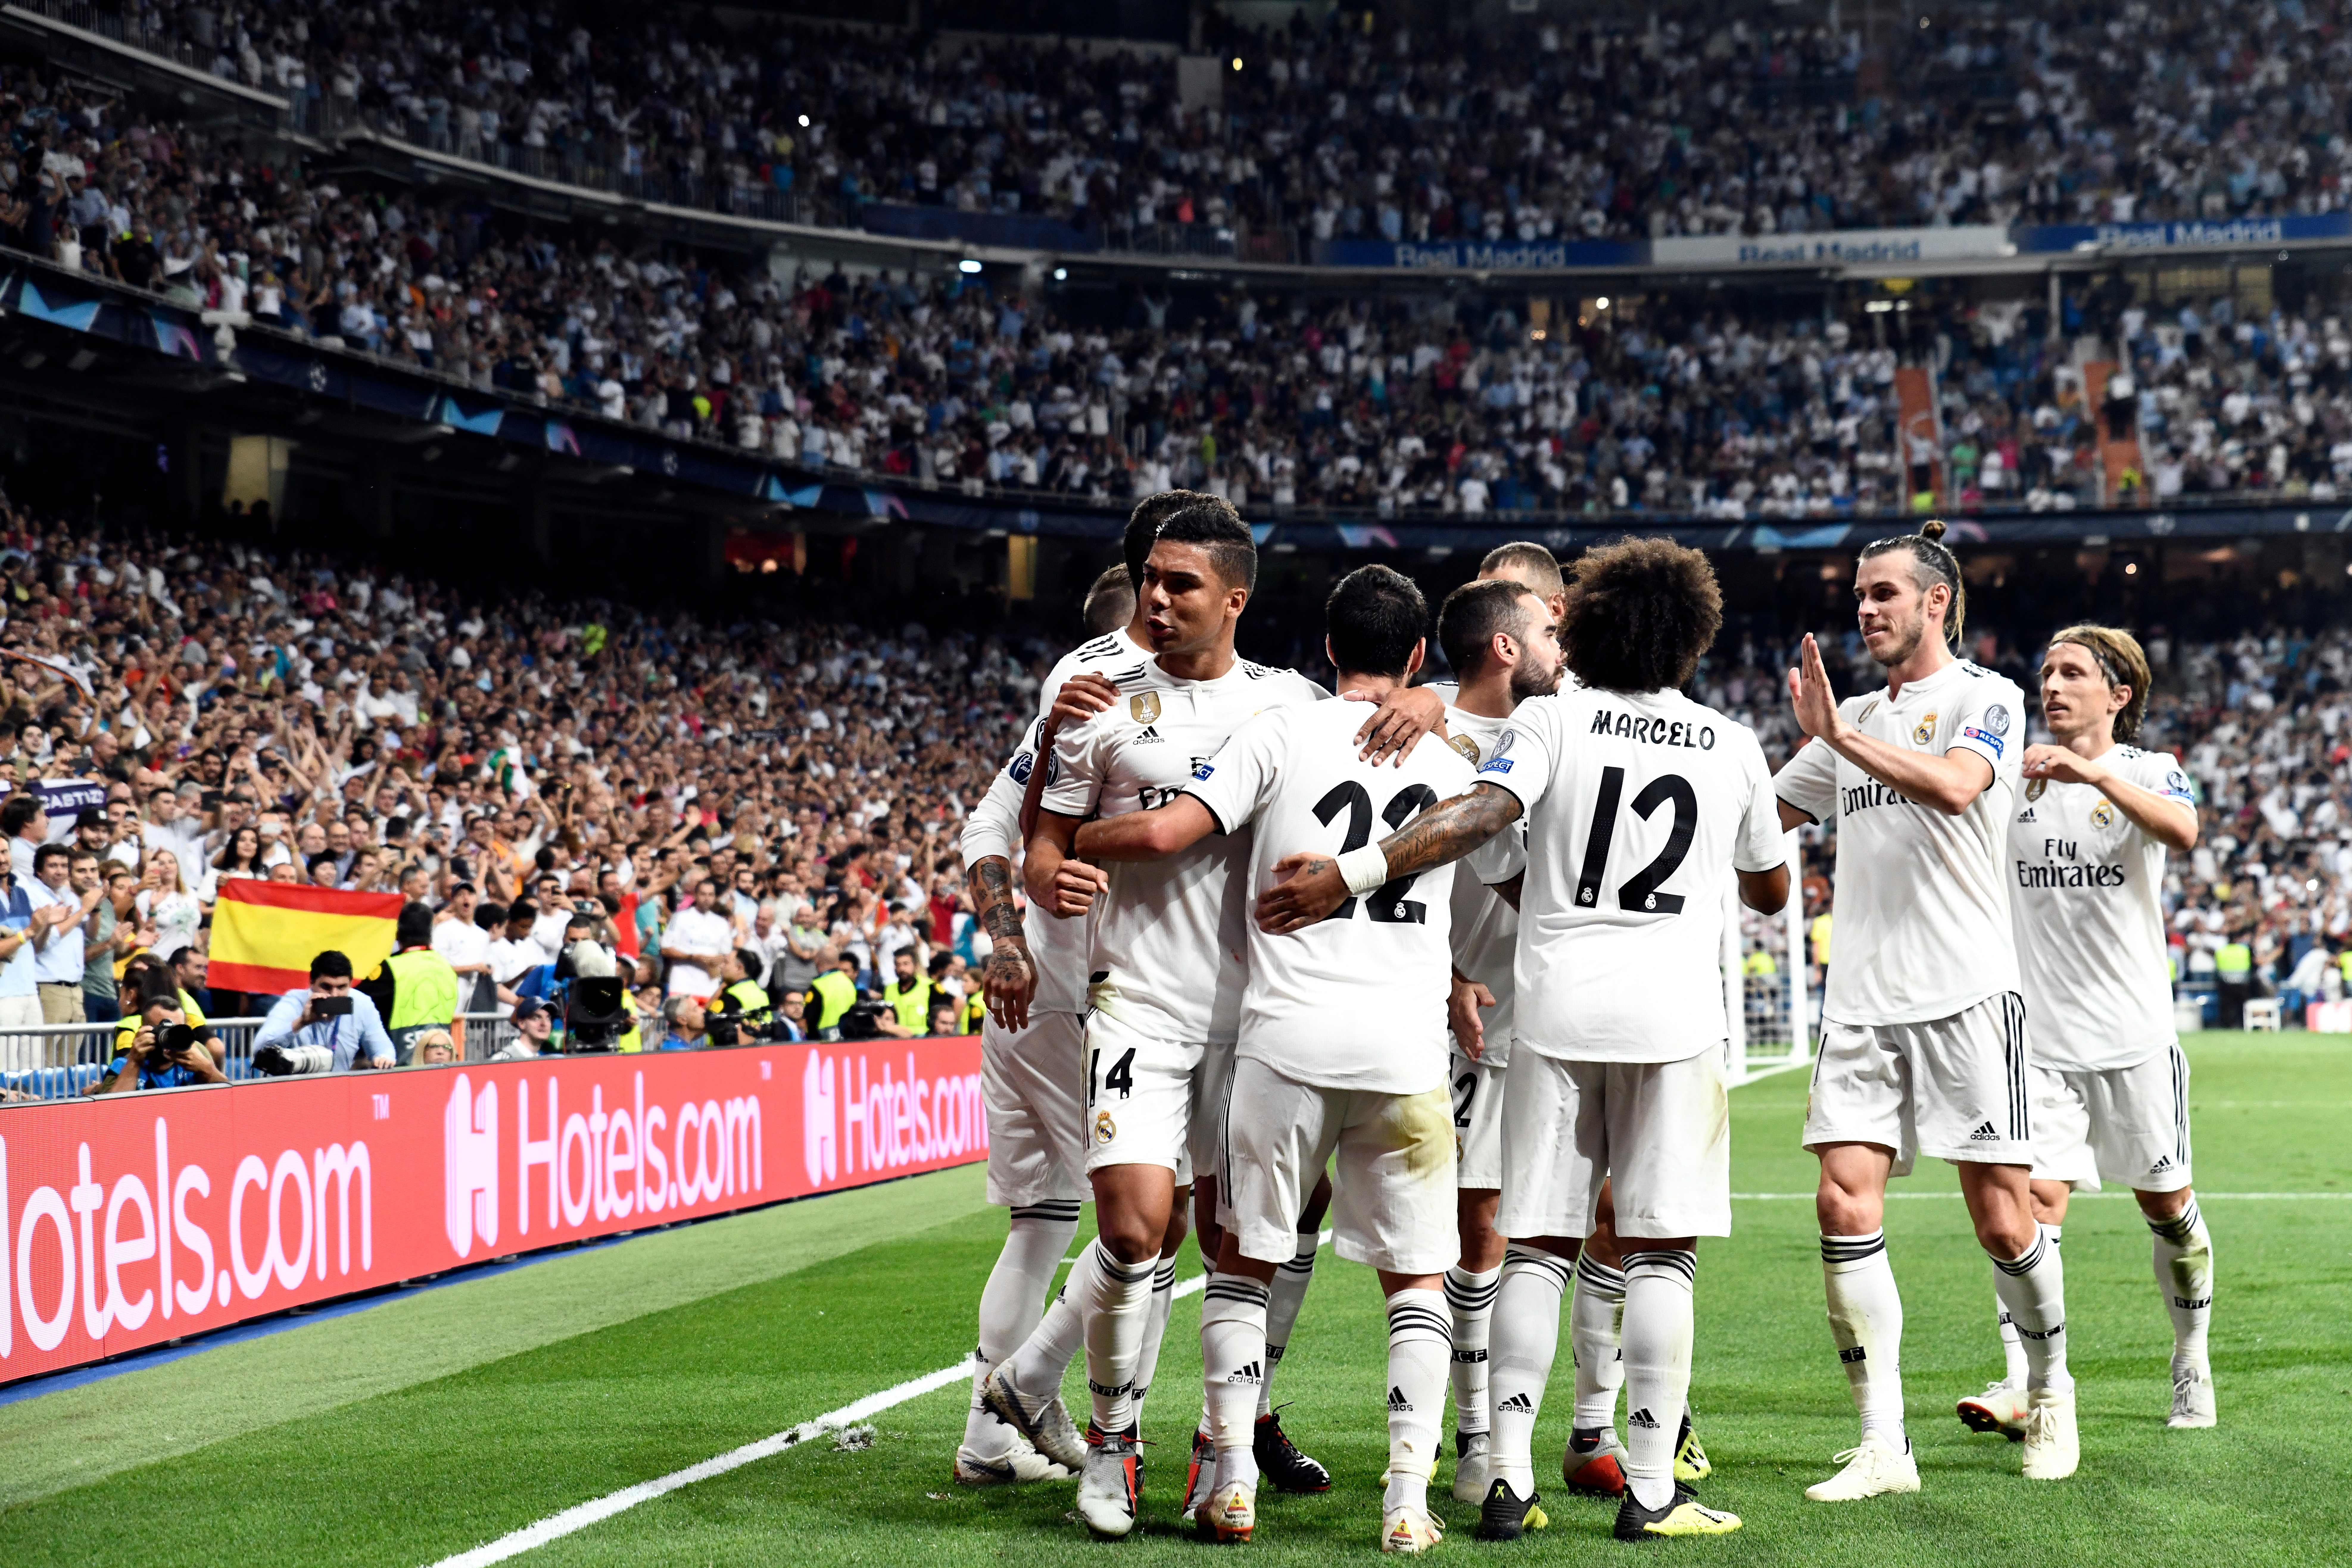 Real Madrid players celebrate the opening goal during the UEFA Champions League group G football match between Real Madrid CF and AS Roma at the Santiago Bernabeu stadium in Madrid on September 19, 2018. (Photo by OSCAR DEL POZO / AFP)        (Photo credit should read OSCAR DEL POZO/AFP/Getty Images)